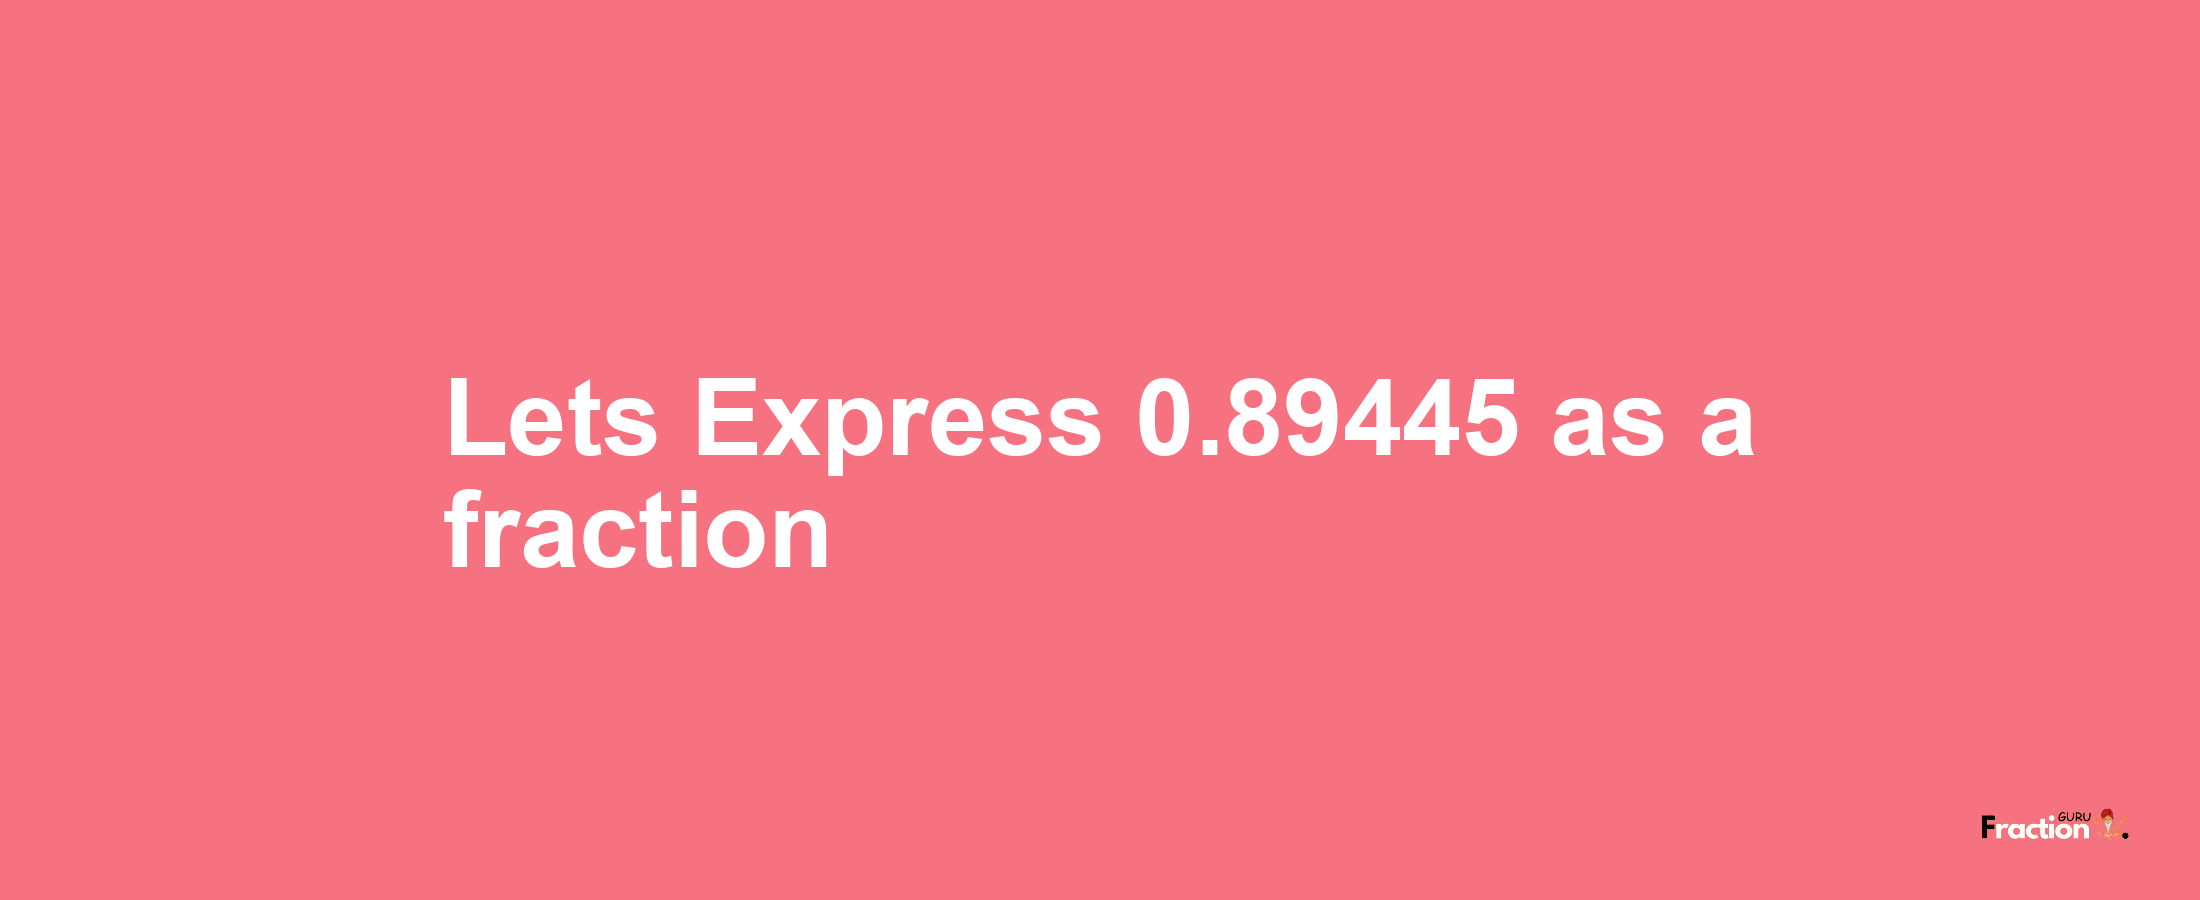 Lets Express 0.89445 as afraction